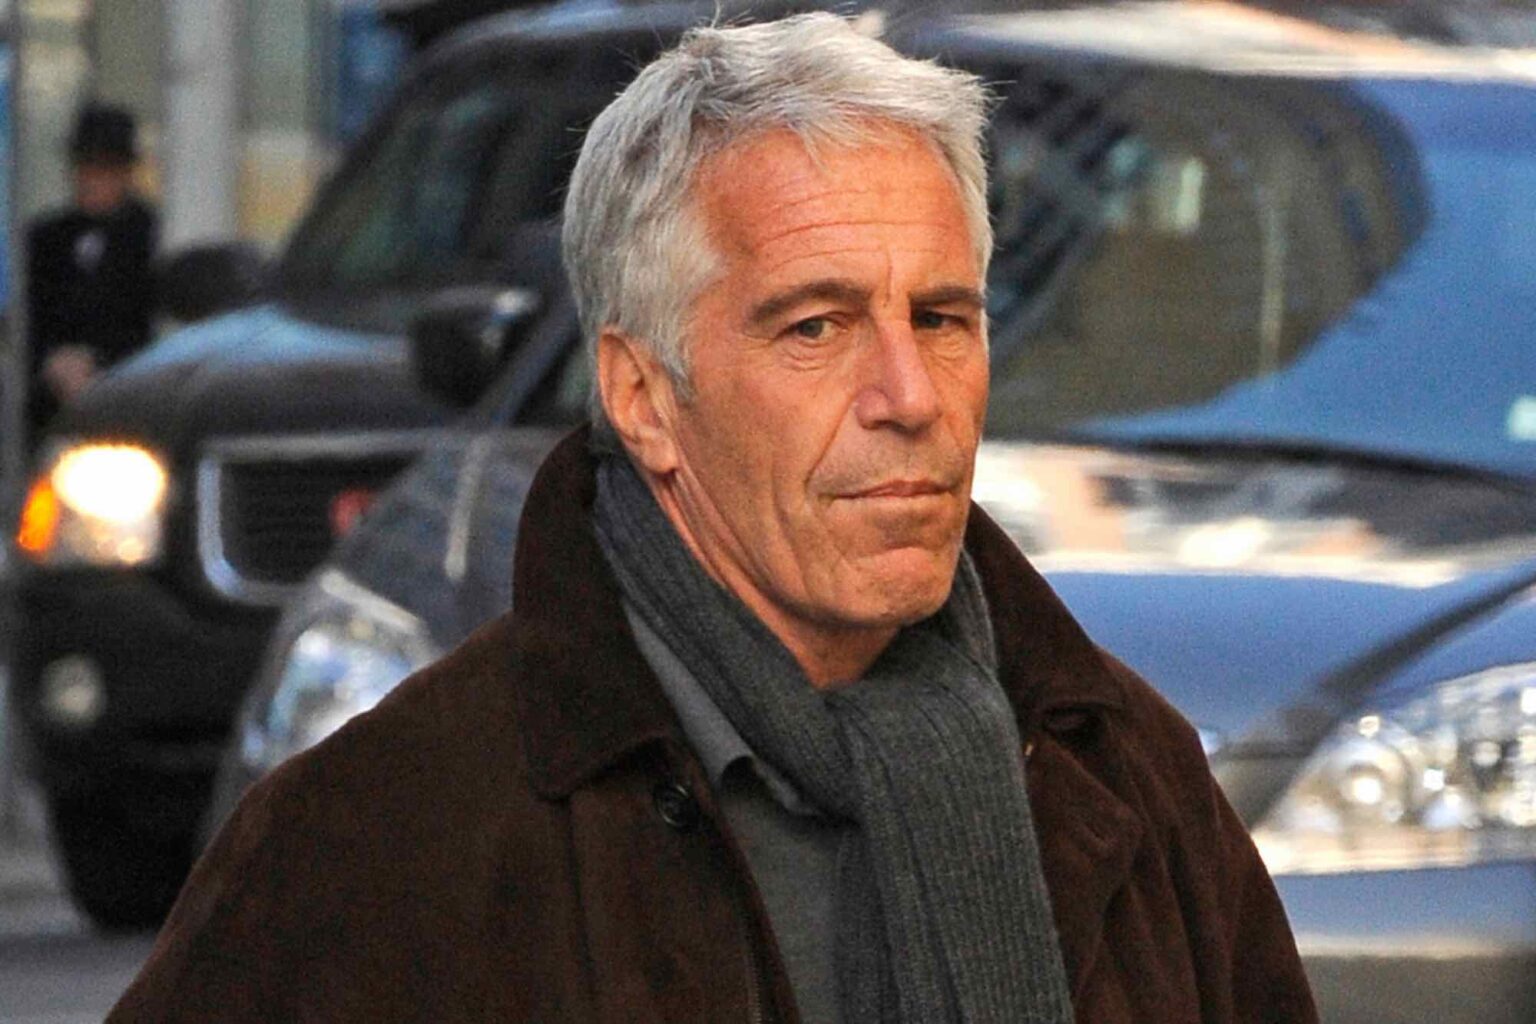 Compared to Jeffrey Epstein, Epstein’s actual family had a low profile. Here's what we know about Epstein's past.